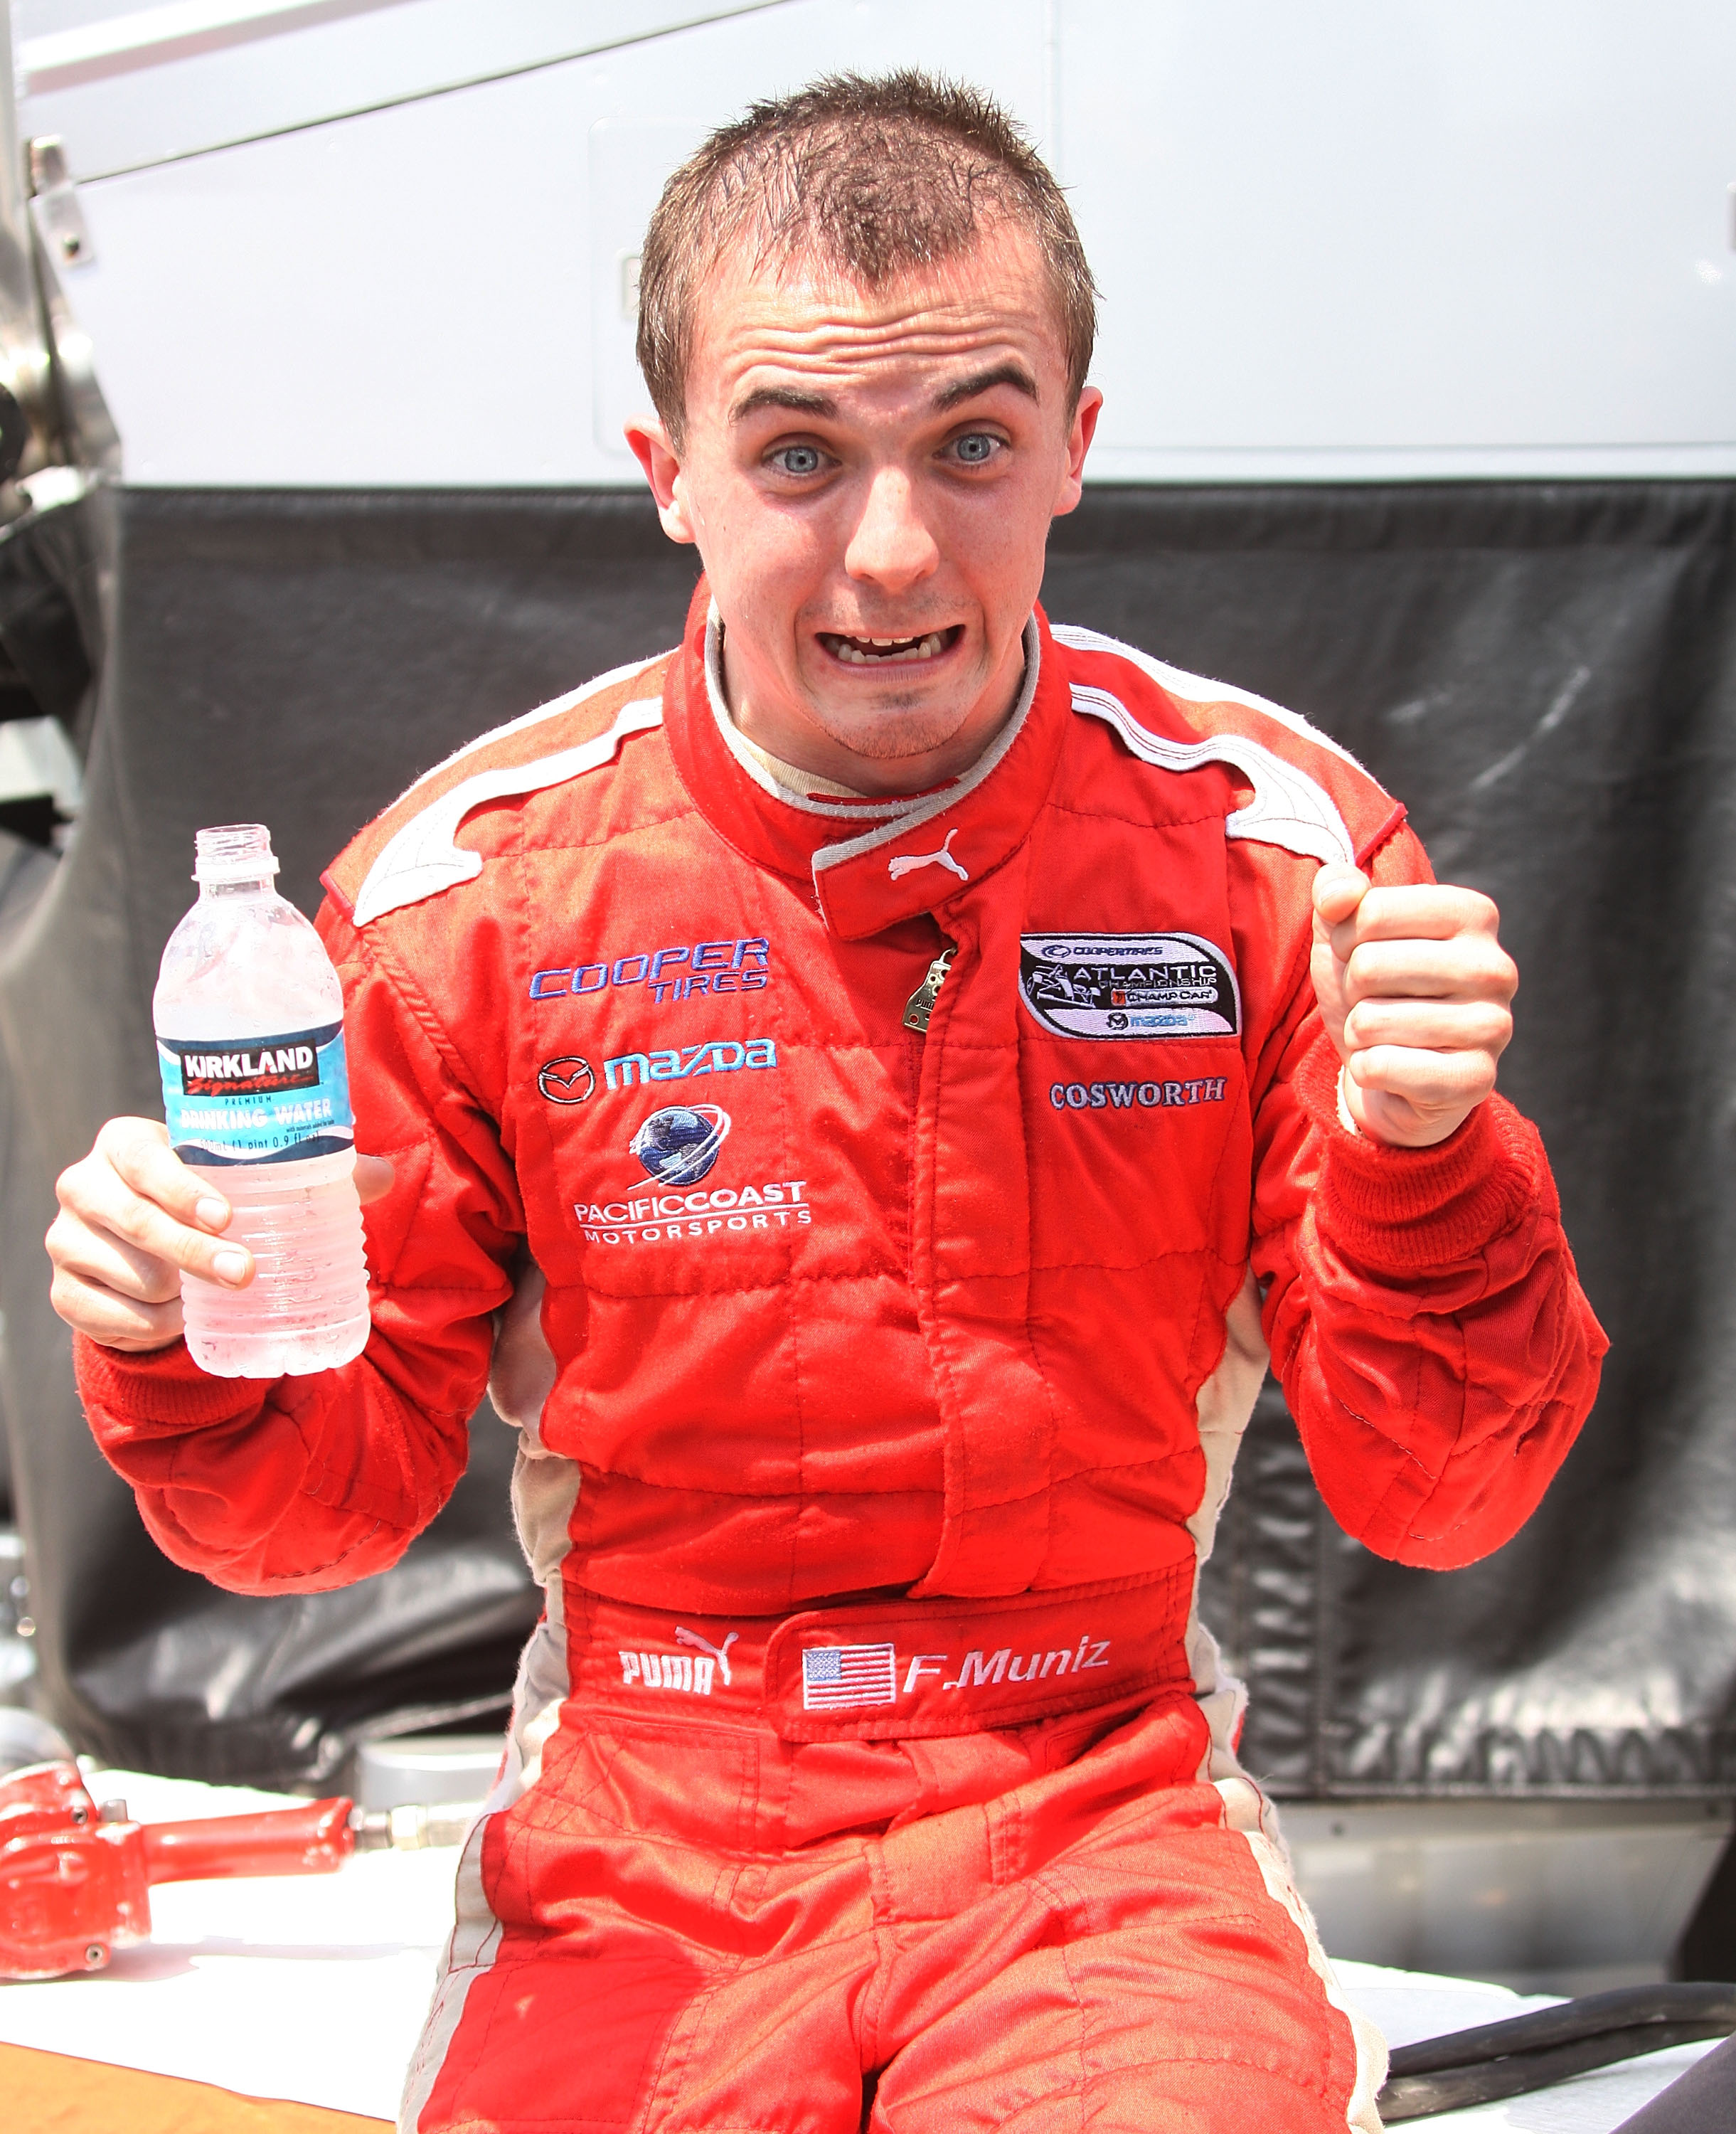 Frankie Muniz attends the 34th Toyota Grand Prix of Long Beach 32nd Annual Pro/Celebrity Race on April 20, 2008 in Long Beach, California | Source: Getty Images